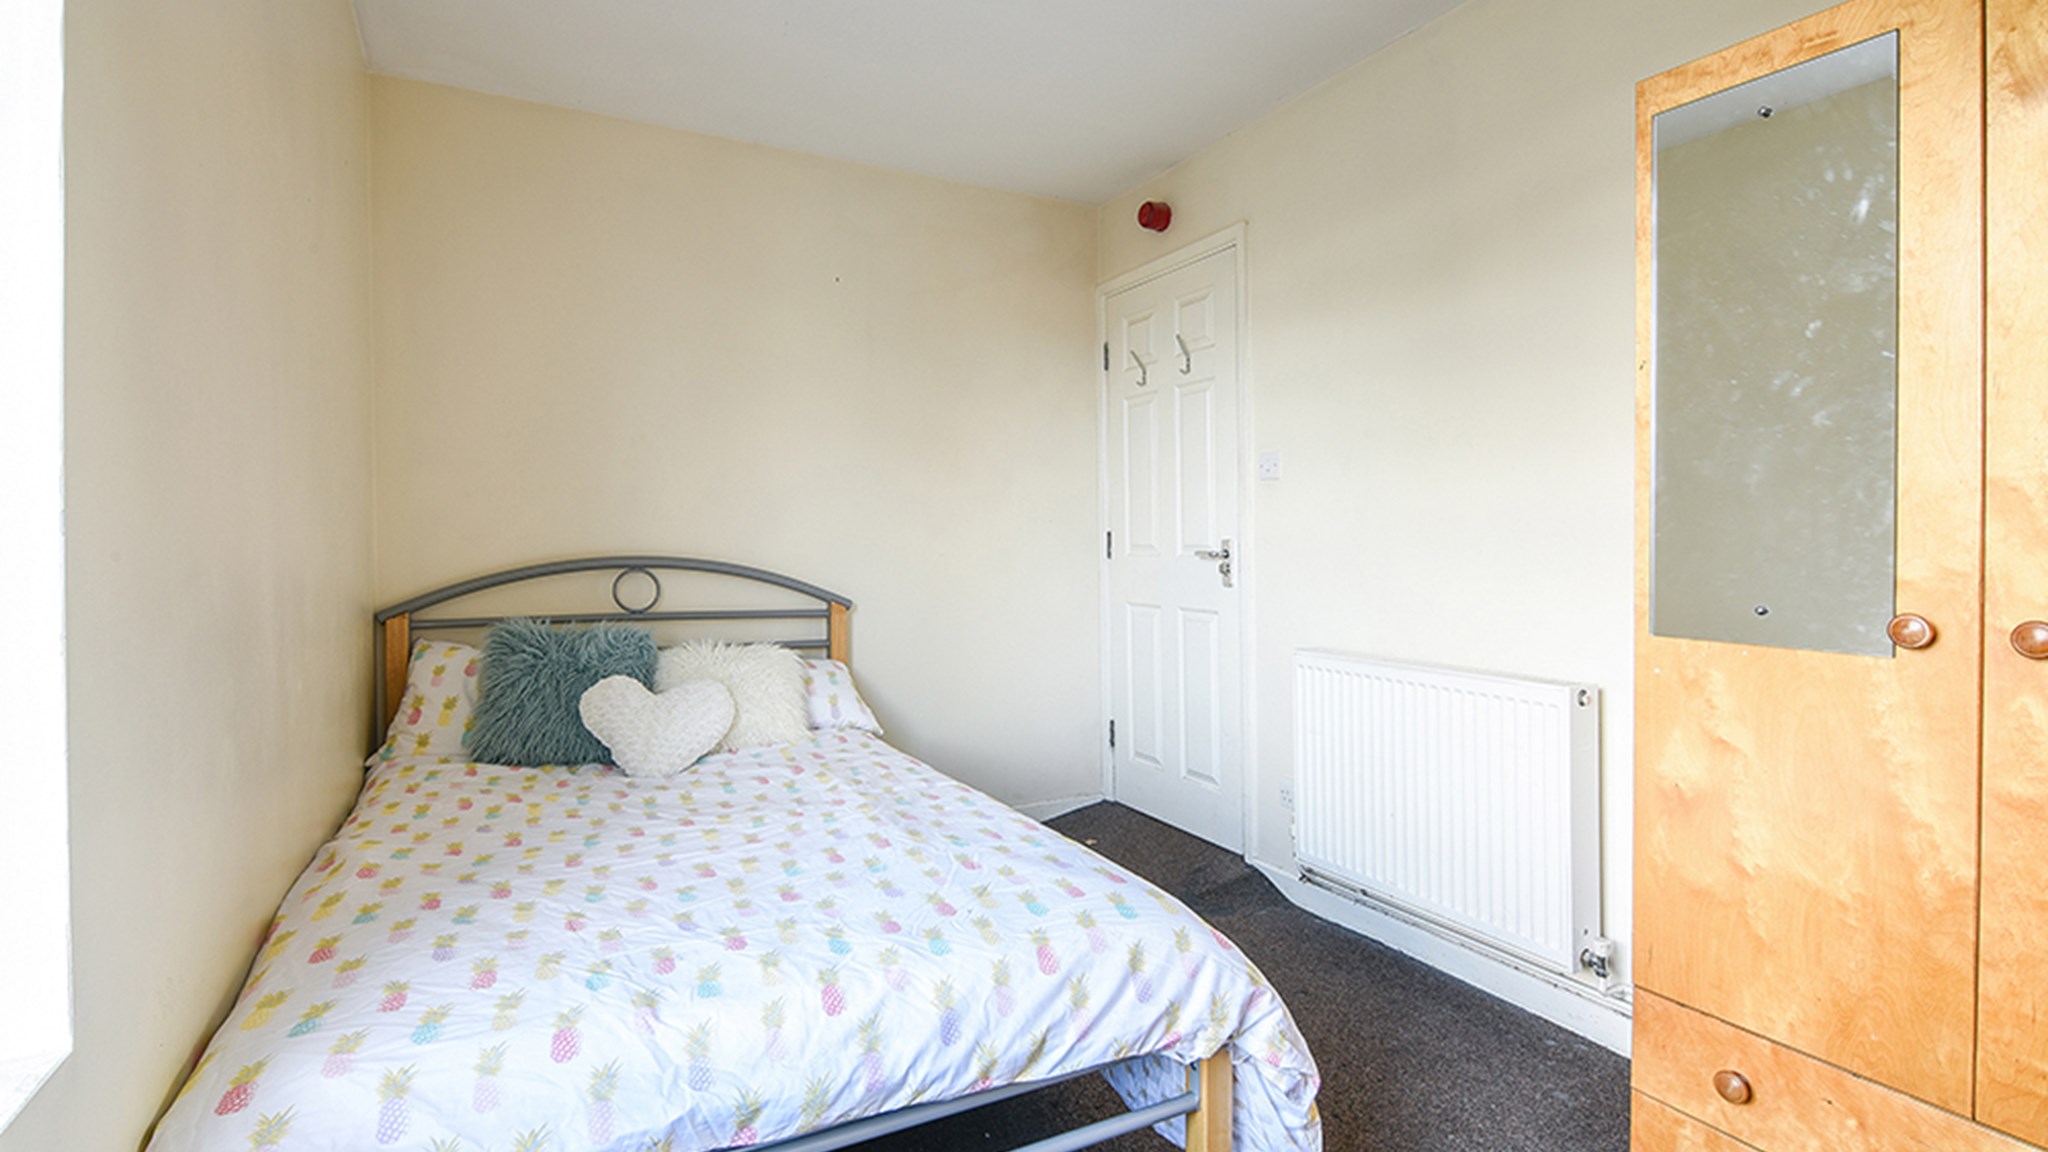 3a Hartley Road, Radford, Nottingham, NG7 3AA (8 of 8 rooms available 17th August 2024) 19